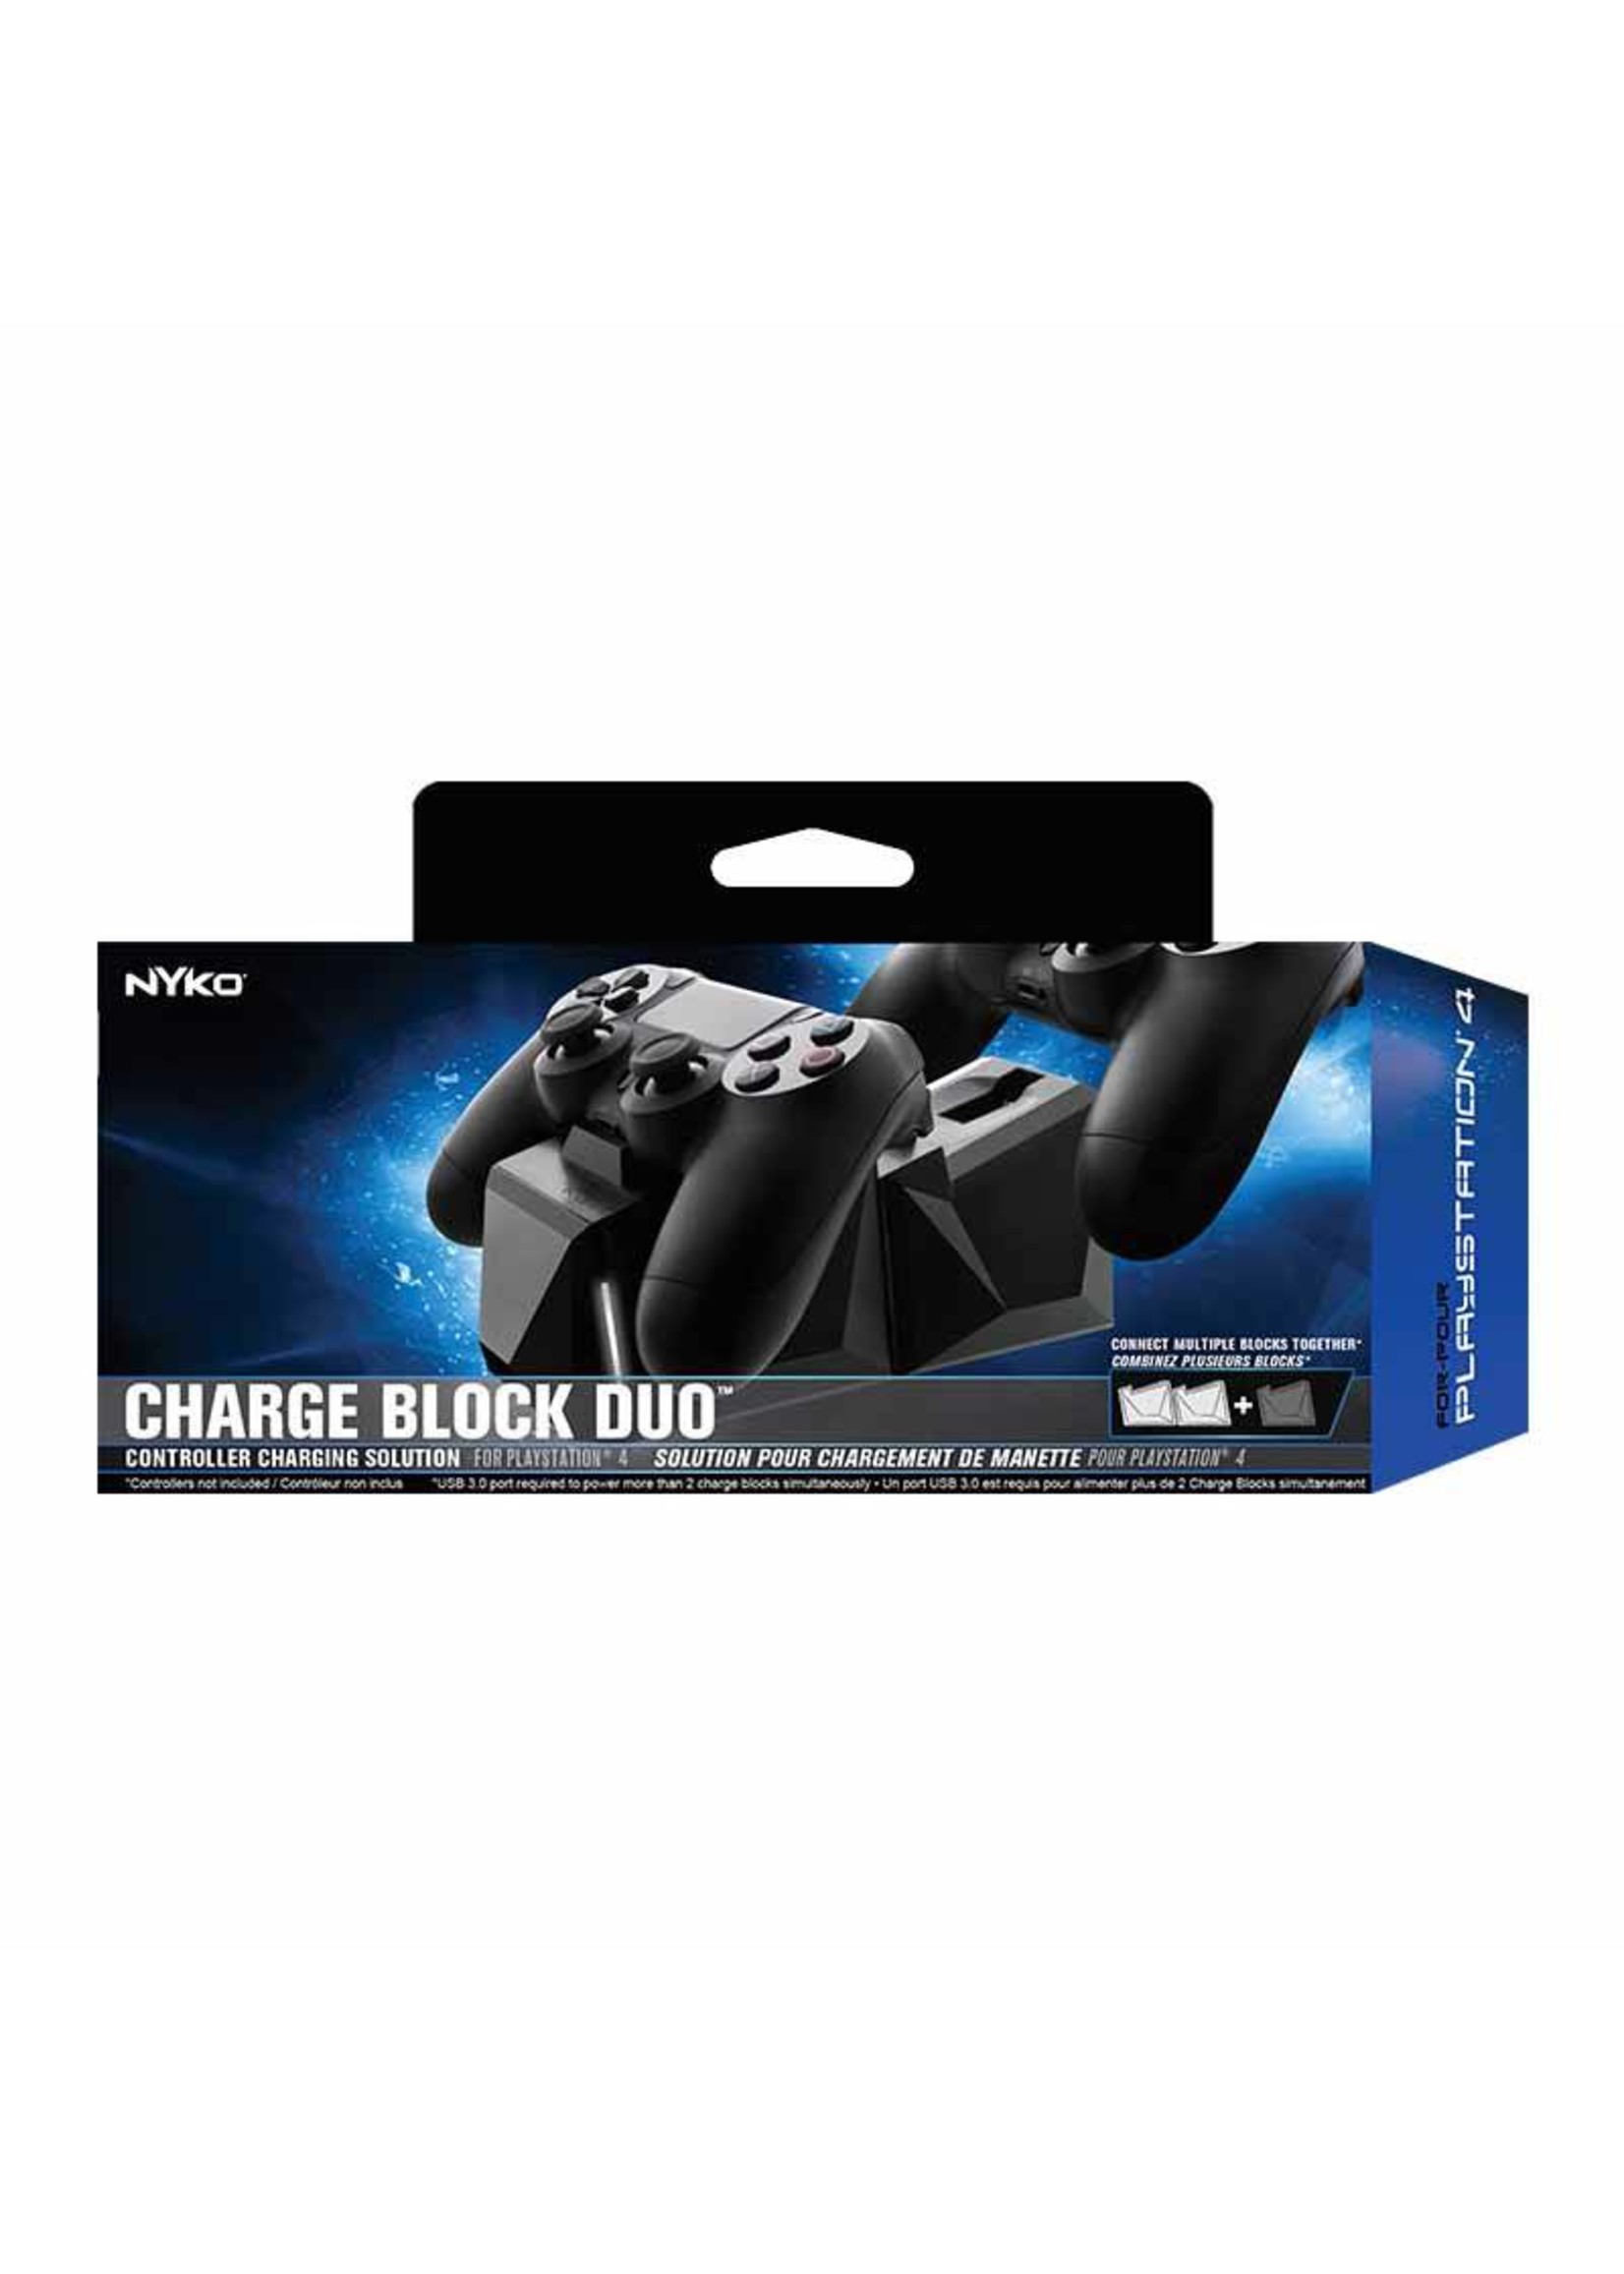 Sony Playstation 4 (PS4) PS4 Charge block duo by NYKO